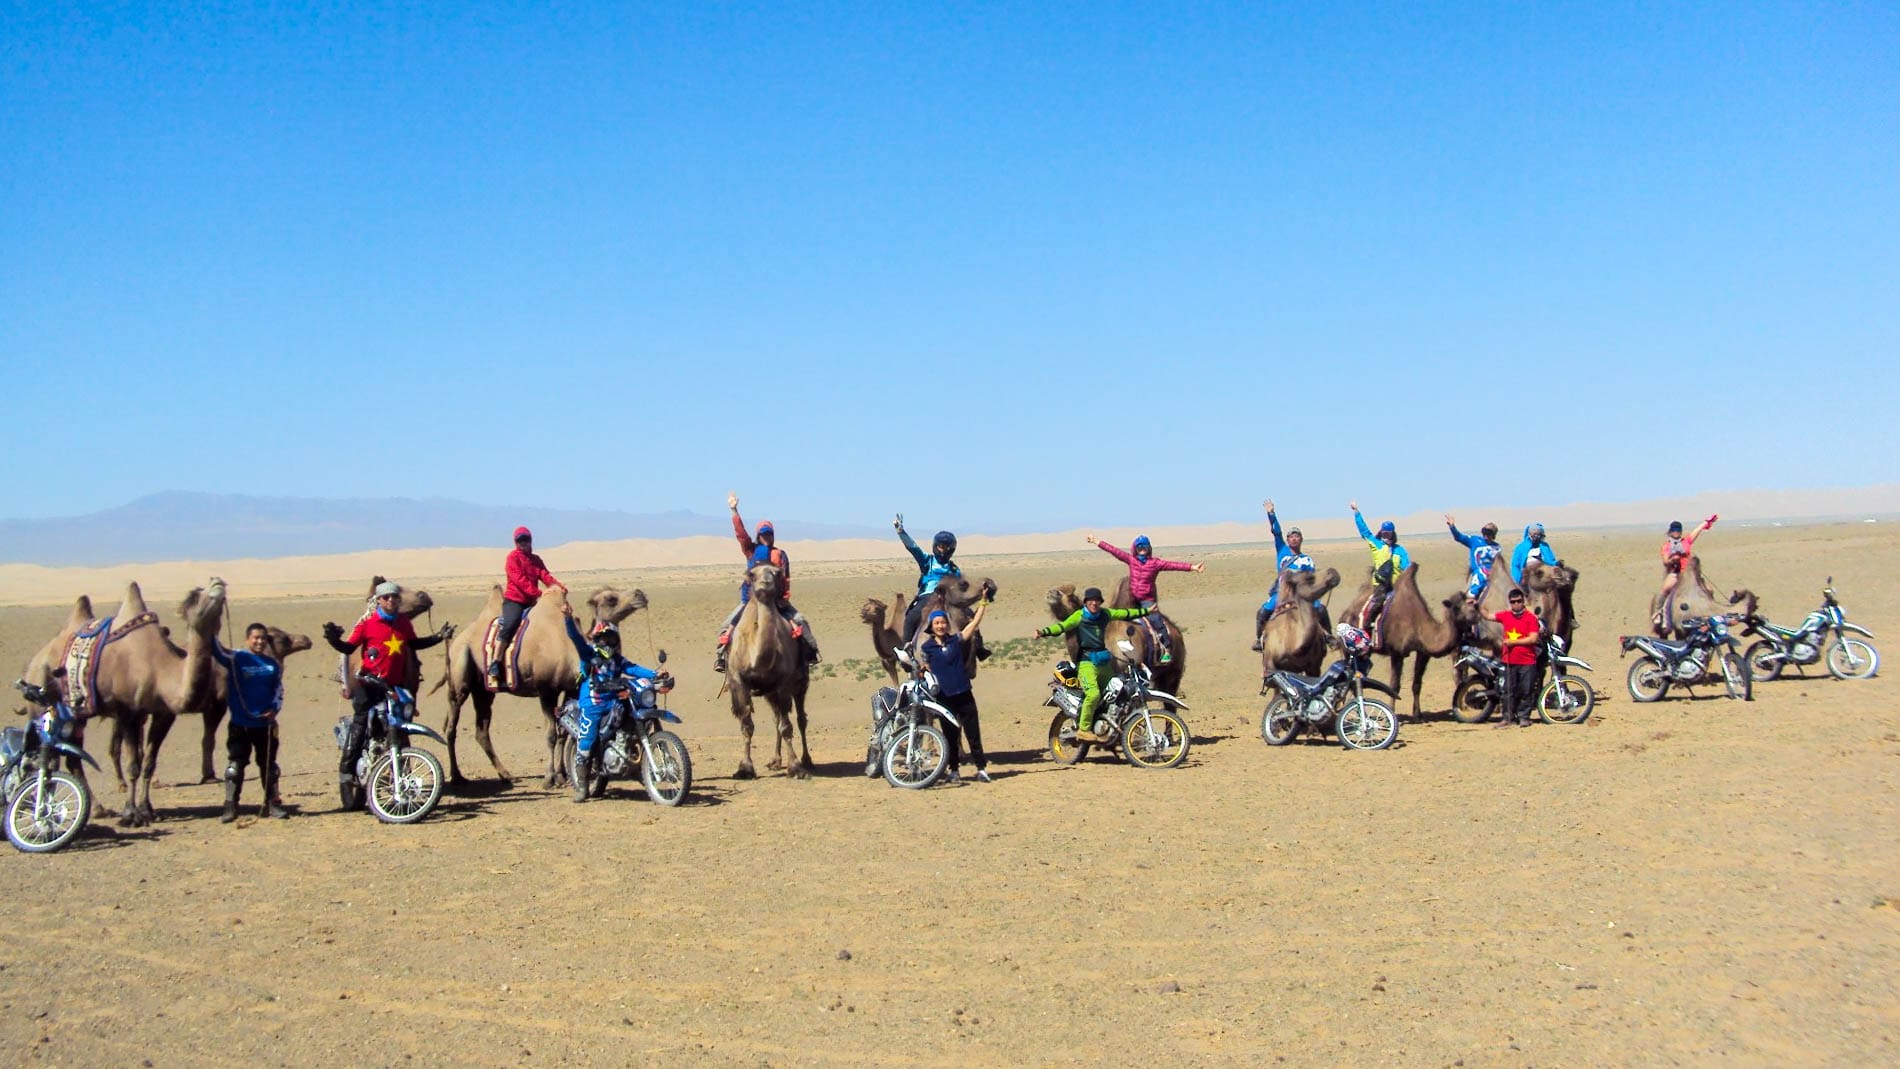 A group of travellers in Mongolia's Gobi Desert wave at the camera. Some are on camels while others are on motorcycles.